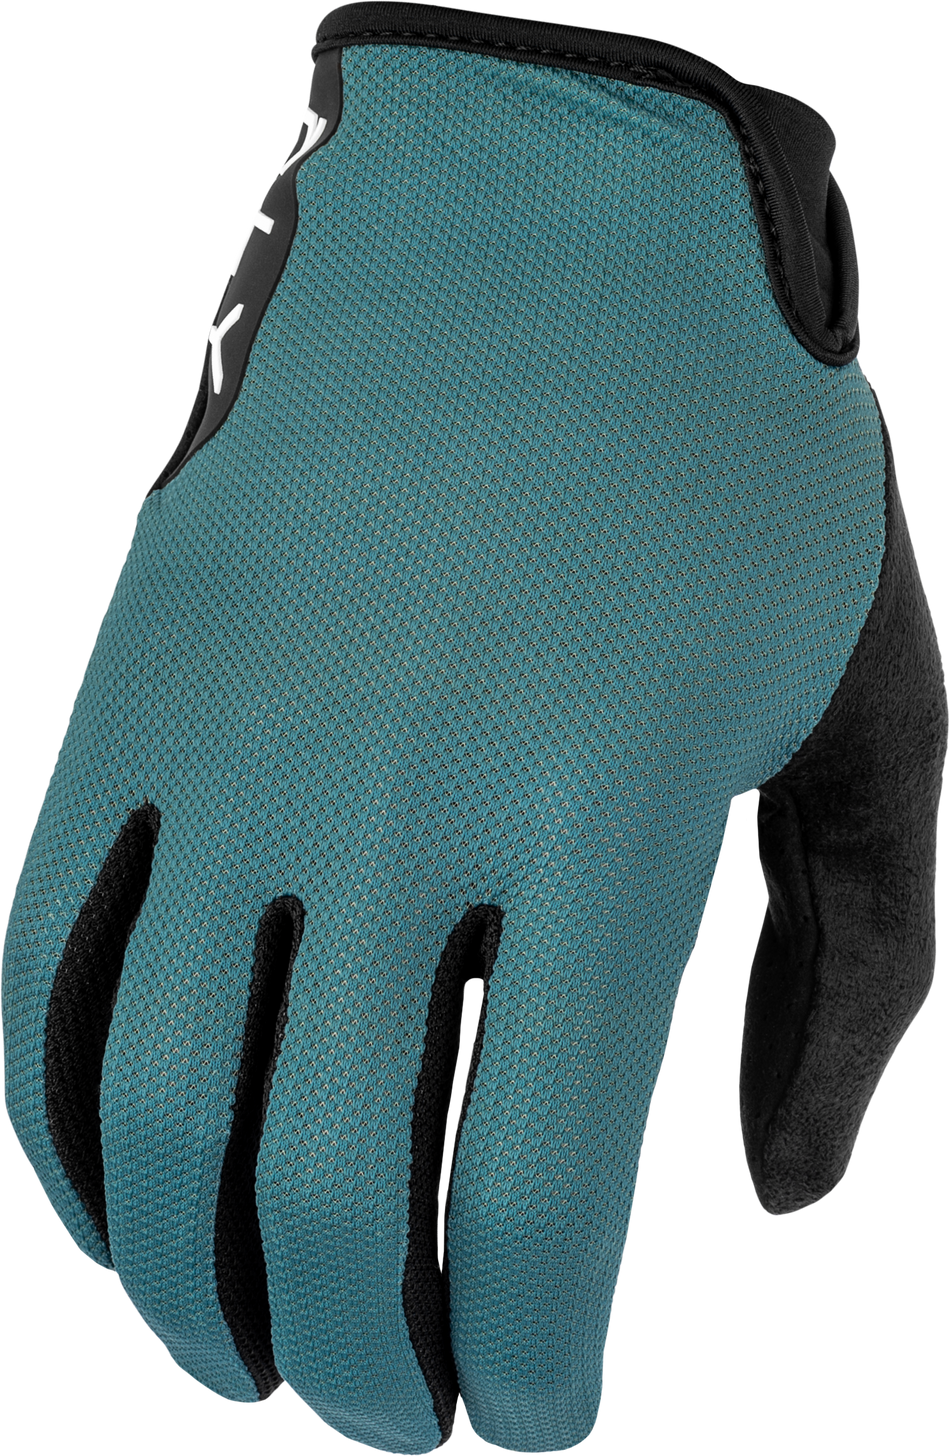 FLY RACING Mesh Gloves Evergreen Md 375-335M